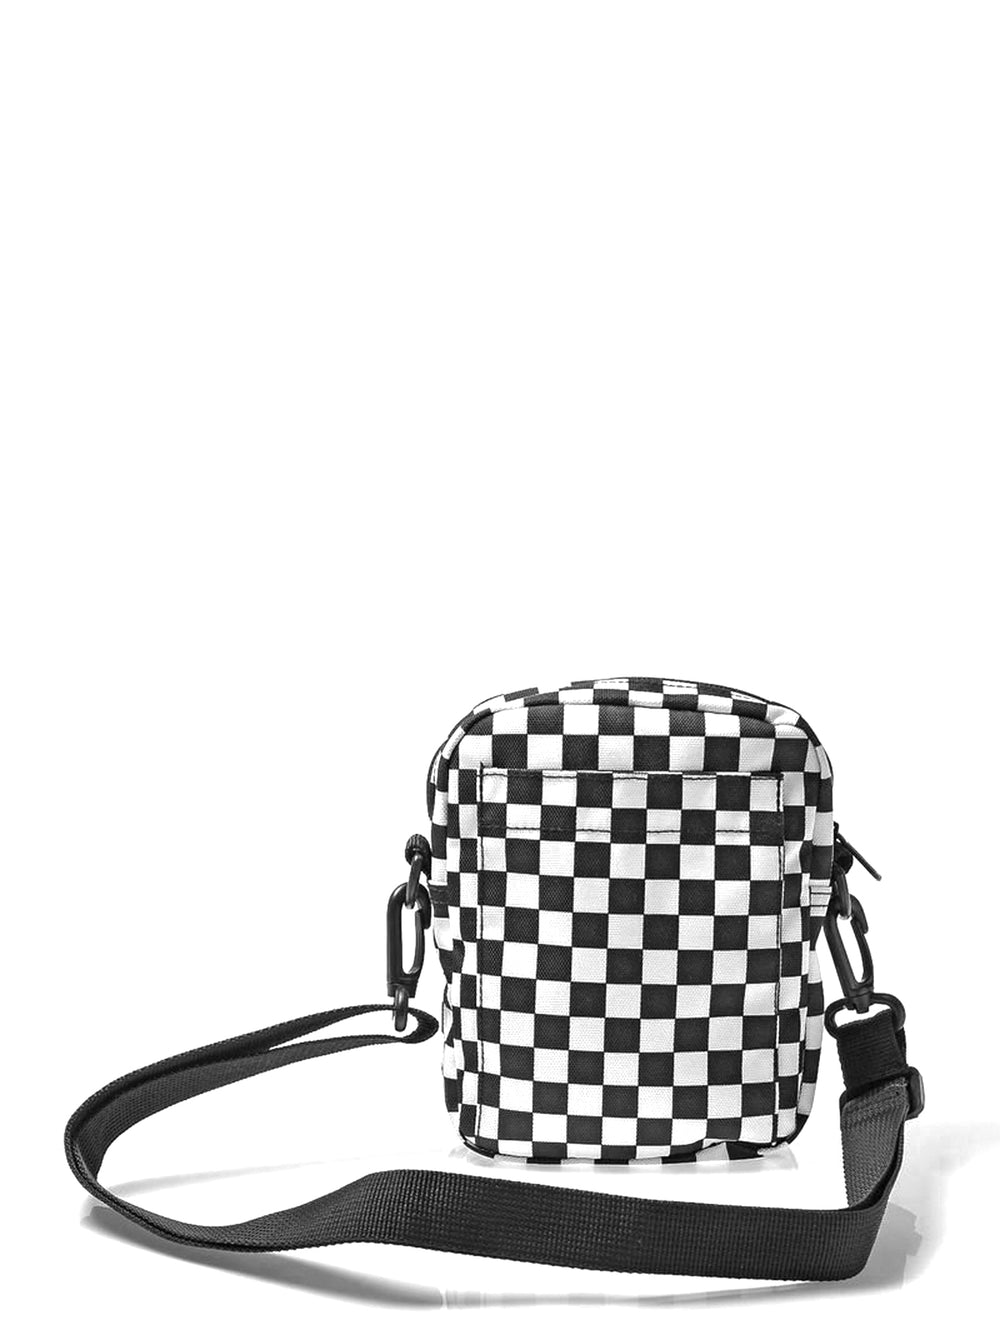 Womens The Beach Boutique Bags & Purses  In Our Hands Go Getter Crossbody  Bag By Vans < Revolution Dept